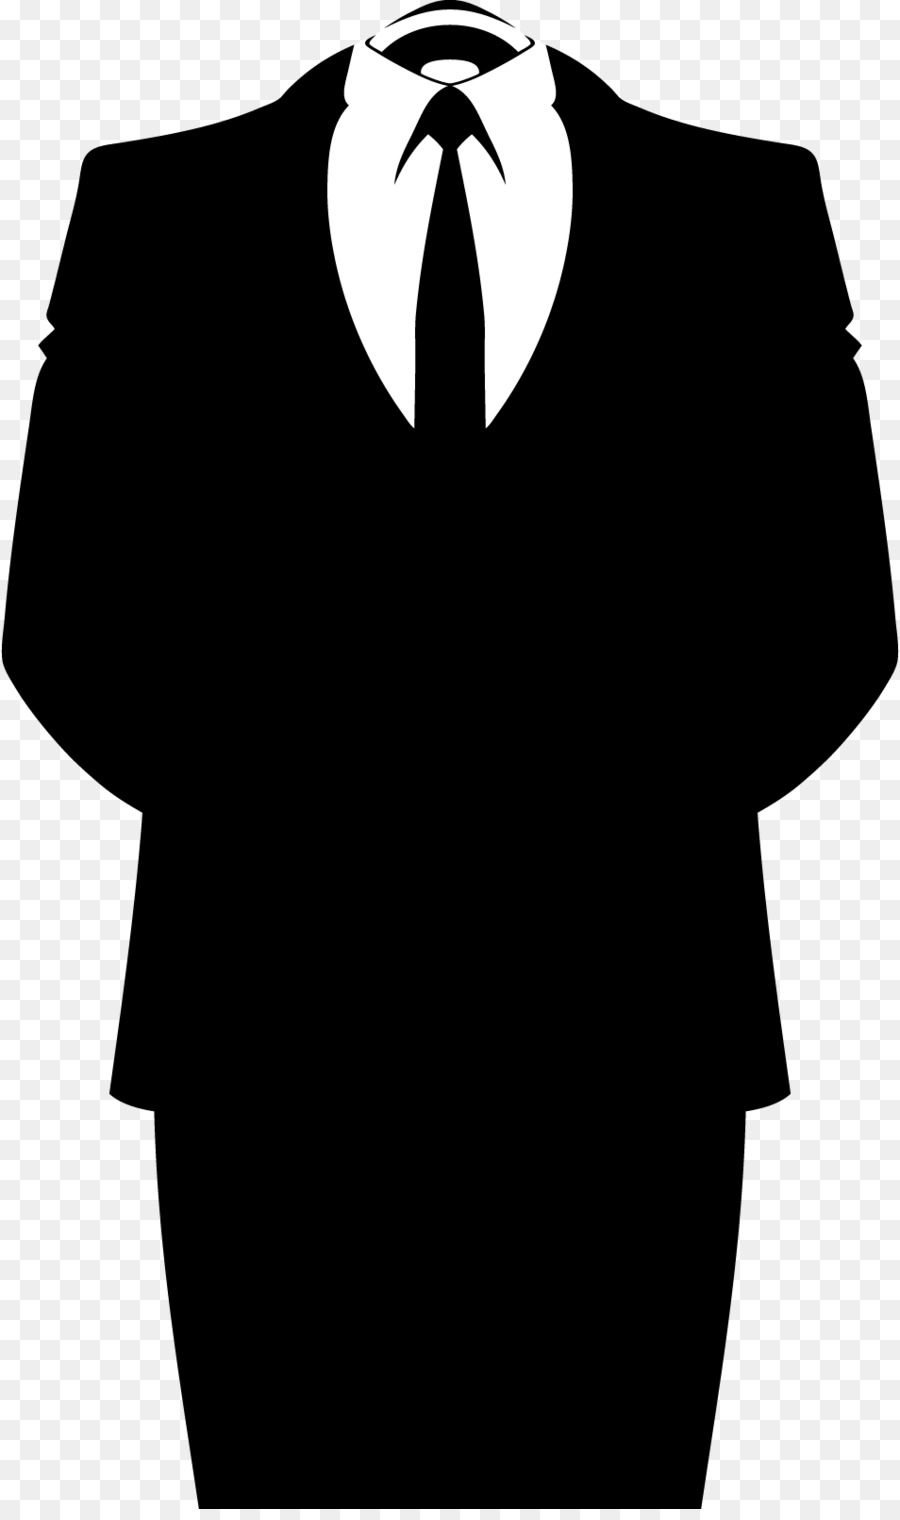 Anonymous YourAnonNews Information Organization - Suit Transparent PNG png download - 954*1600 - Free Transparent Anonymous png Download.